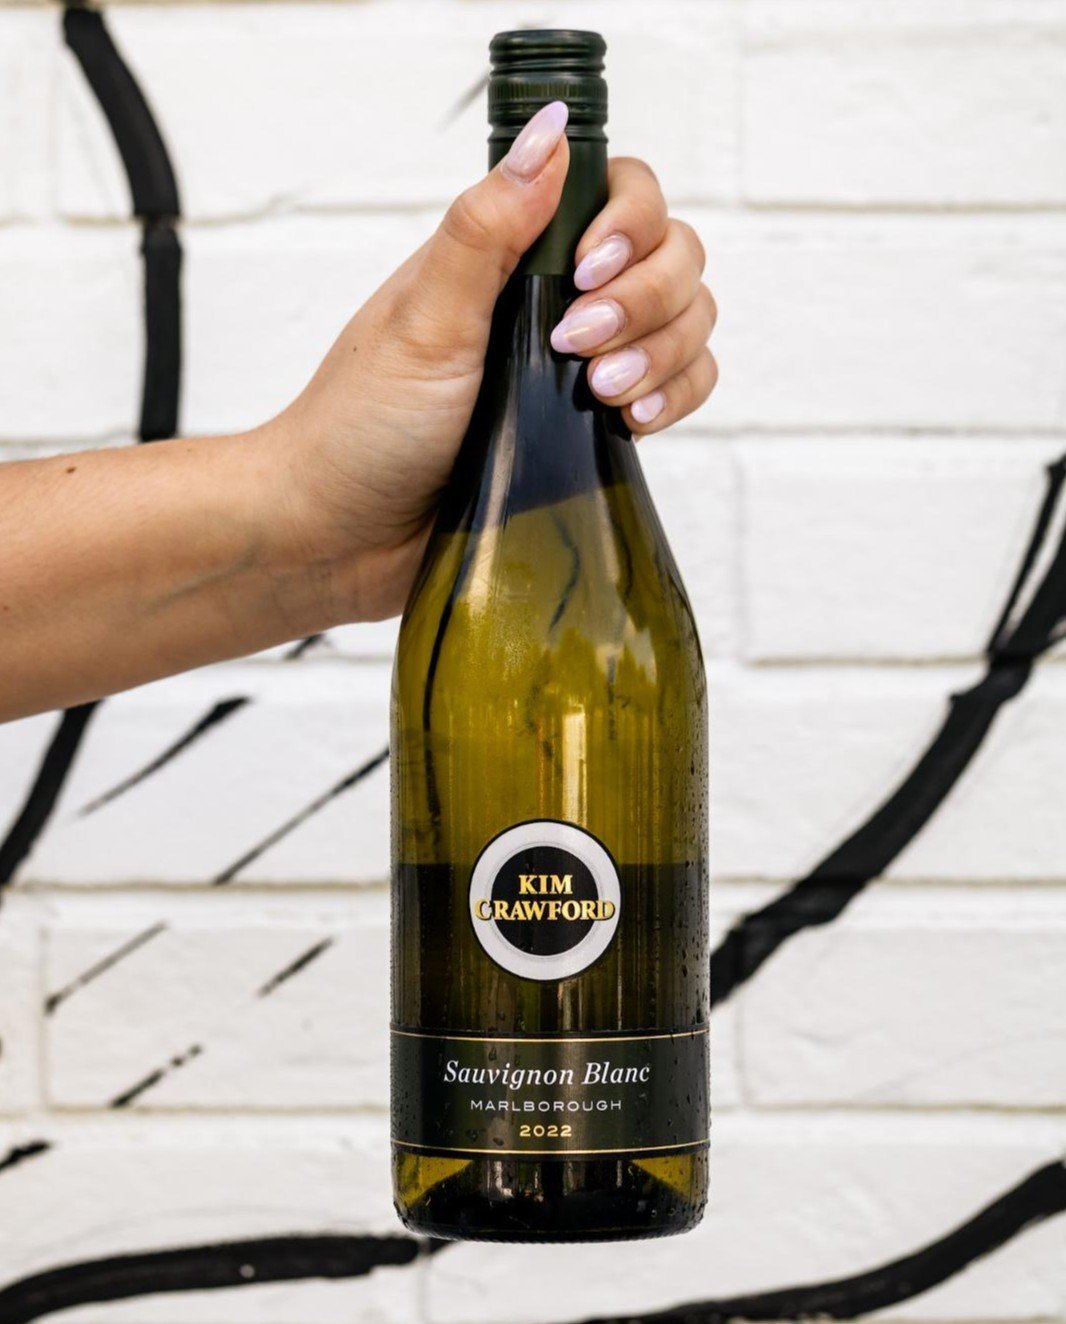 And just when you think it can&rsquo;t get any better, it can!

2022 Kim Crawford Sauvignon Blanc Marlborough New Zealand &ndash; pale yellow color, intense tropical fruit aromas, flavors of passion fruit, stone fruit, melon, and citrus, a touch of h